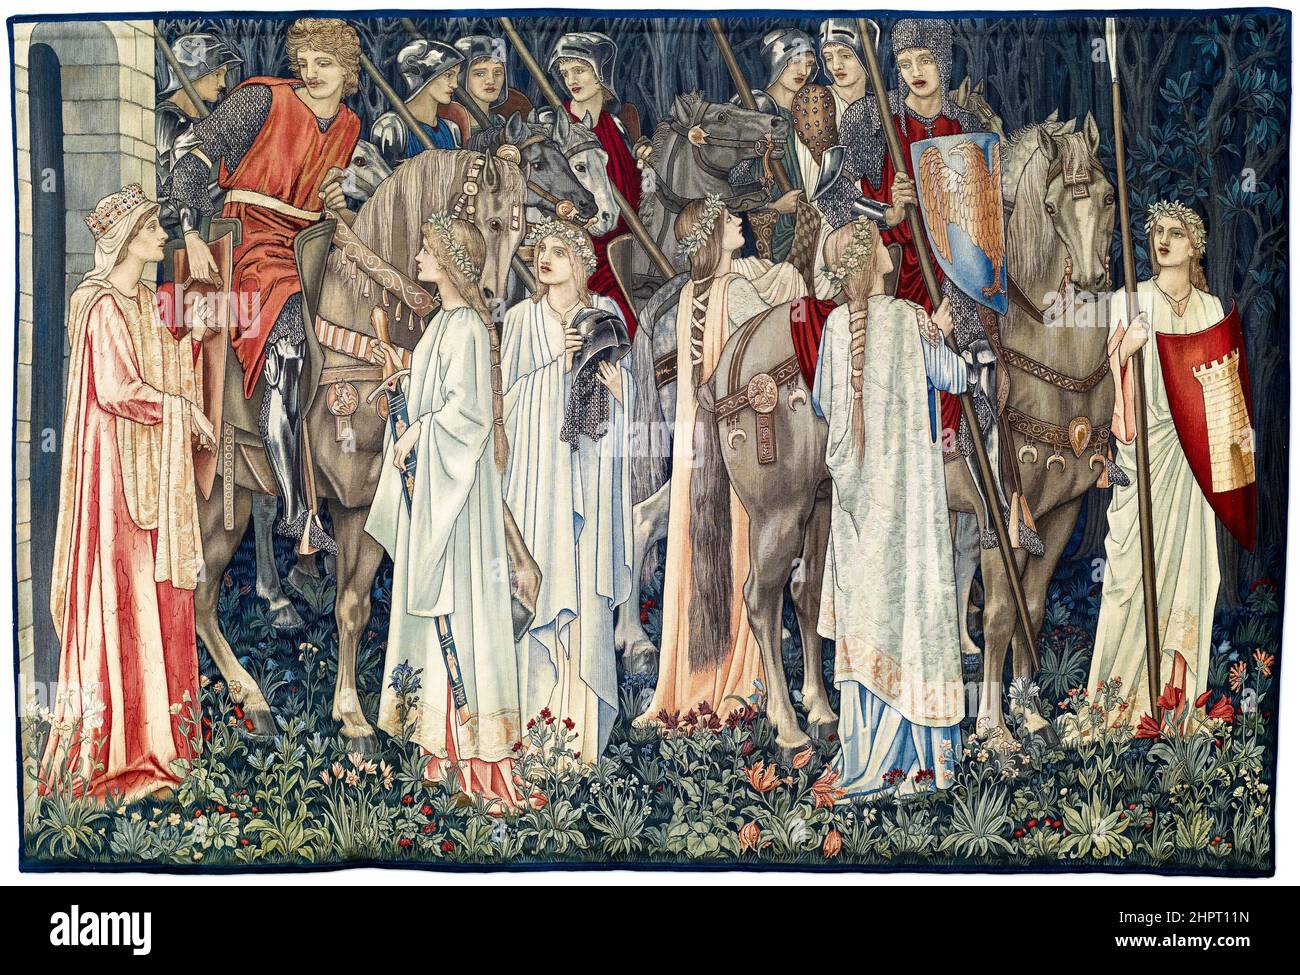 Quest for the Holy Grail Tapestries: Panel 2 - The Arming and Departure of the Knights, art and crafts movement tapestry by Sir Edward Coley Burne-Jones, William Morris & John Henry Dearle, 1895-1896 Stock Photo